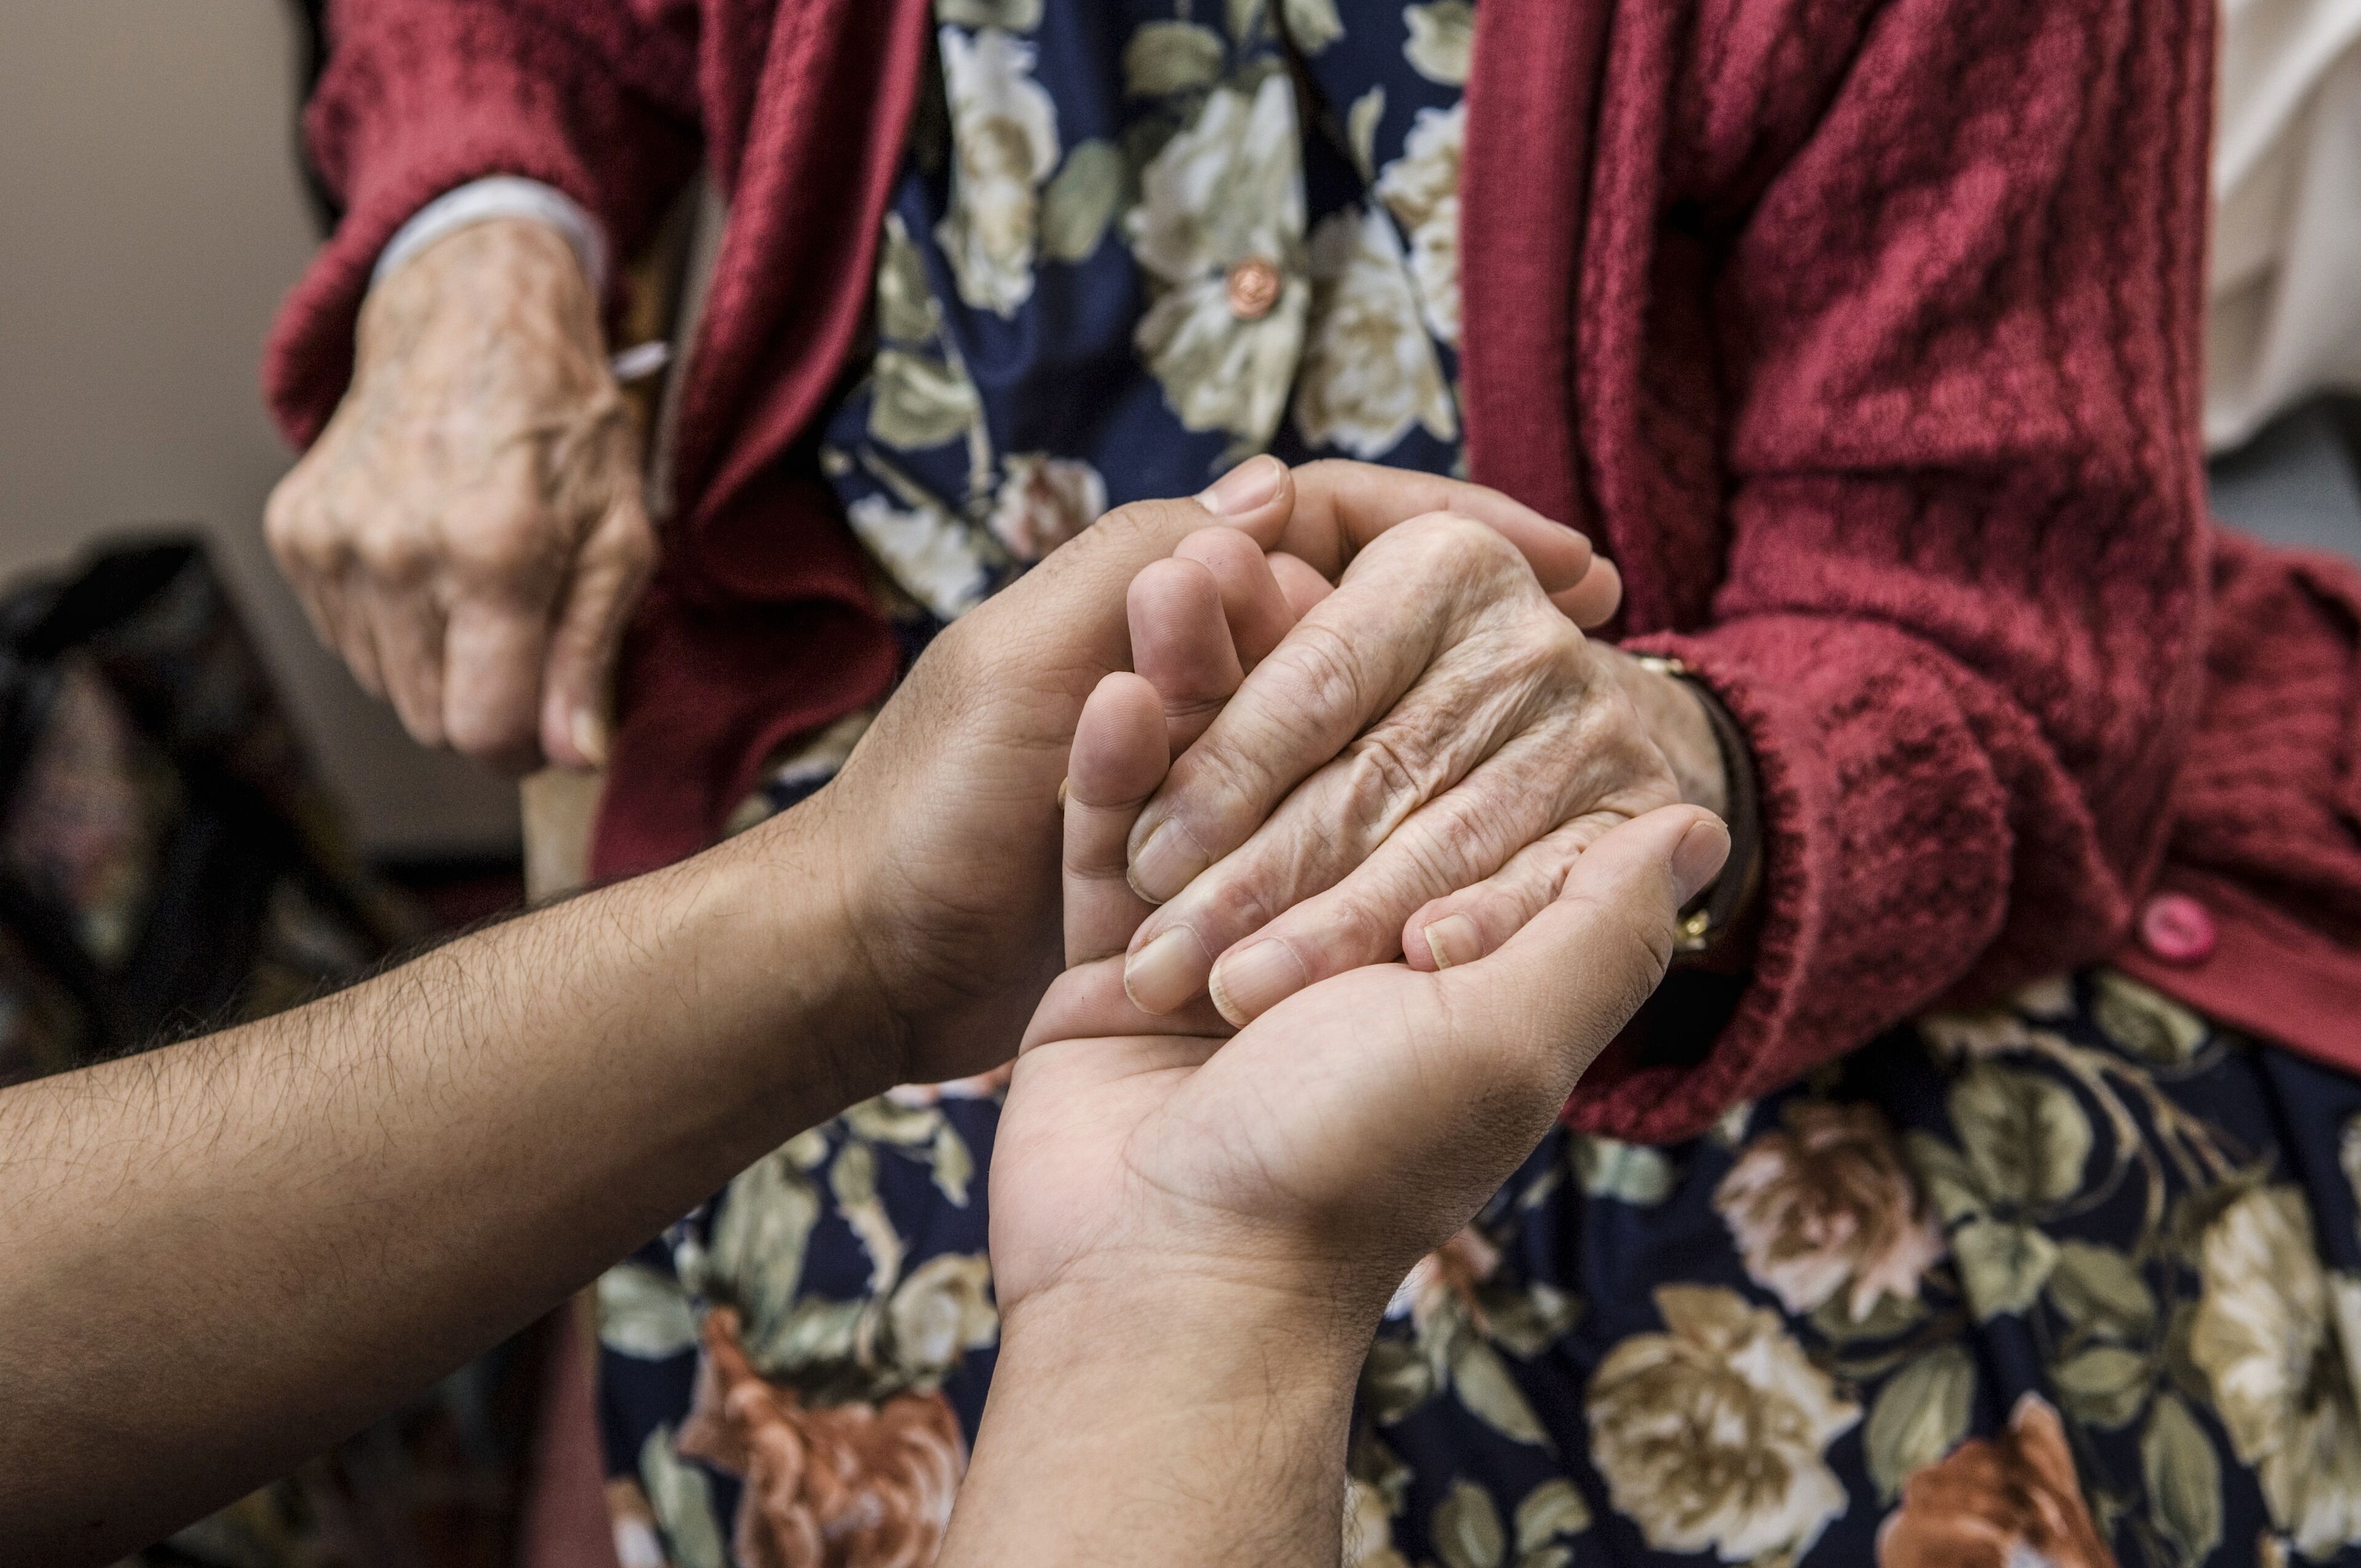 An elderly person in a red sweater holding hands with a younger individual, symbolizing care and connection.